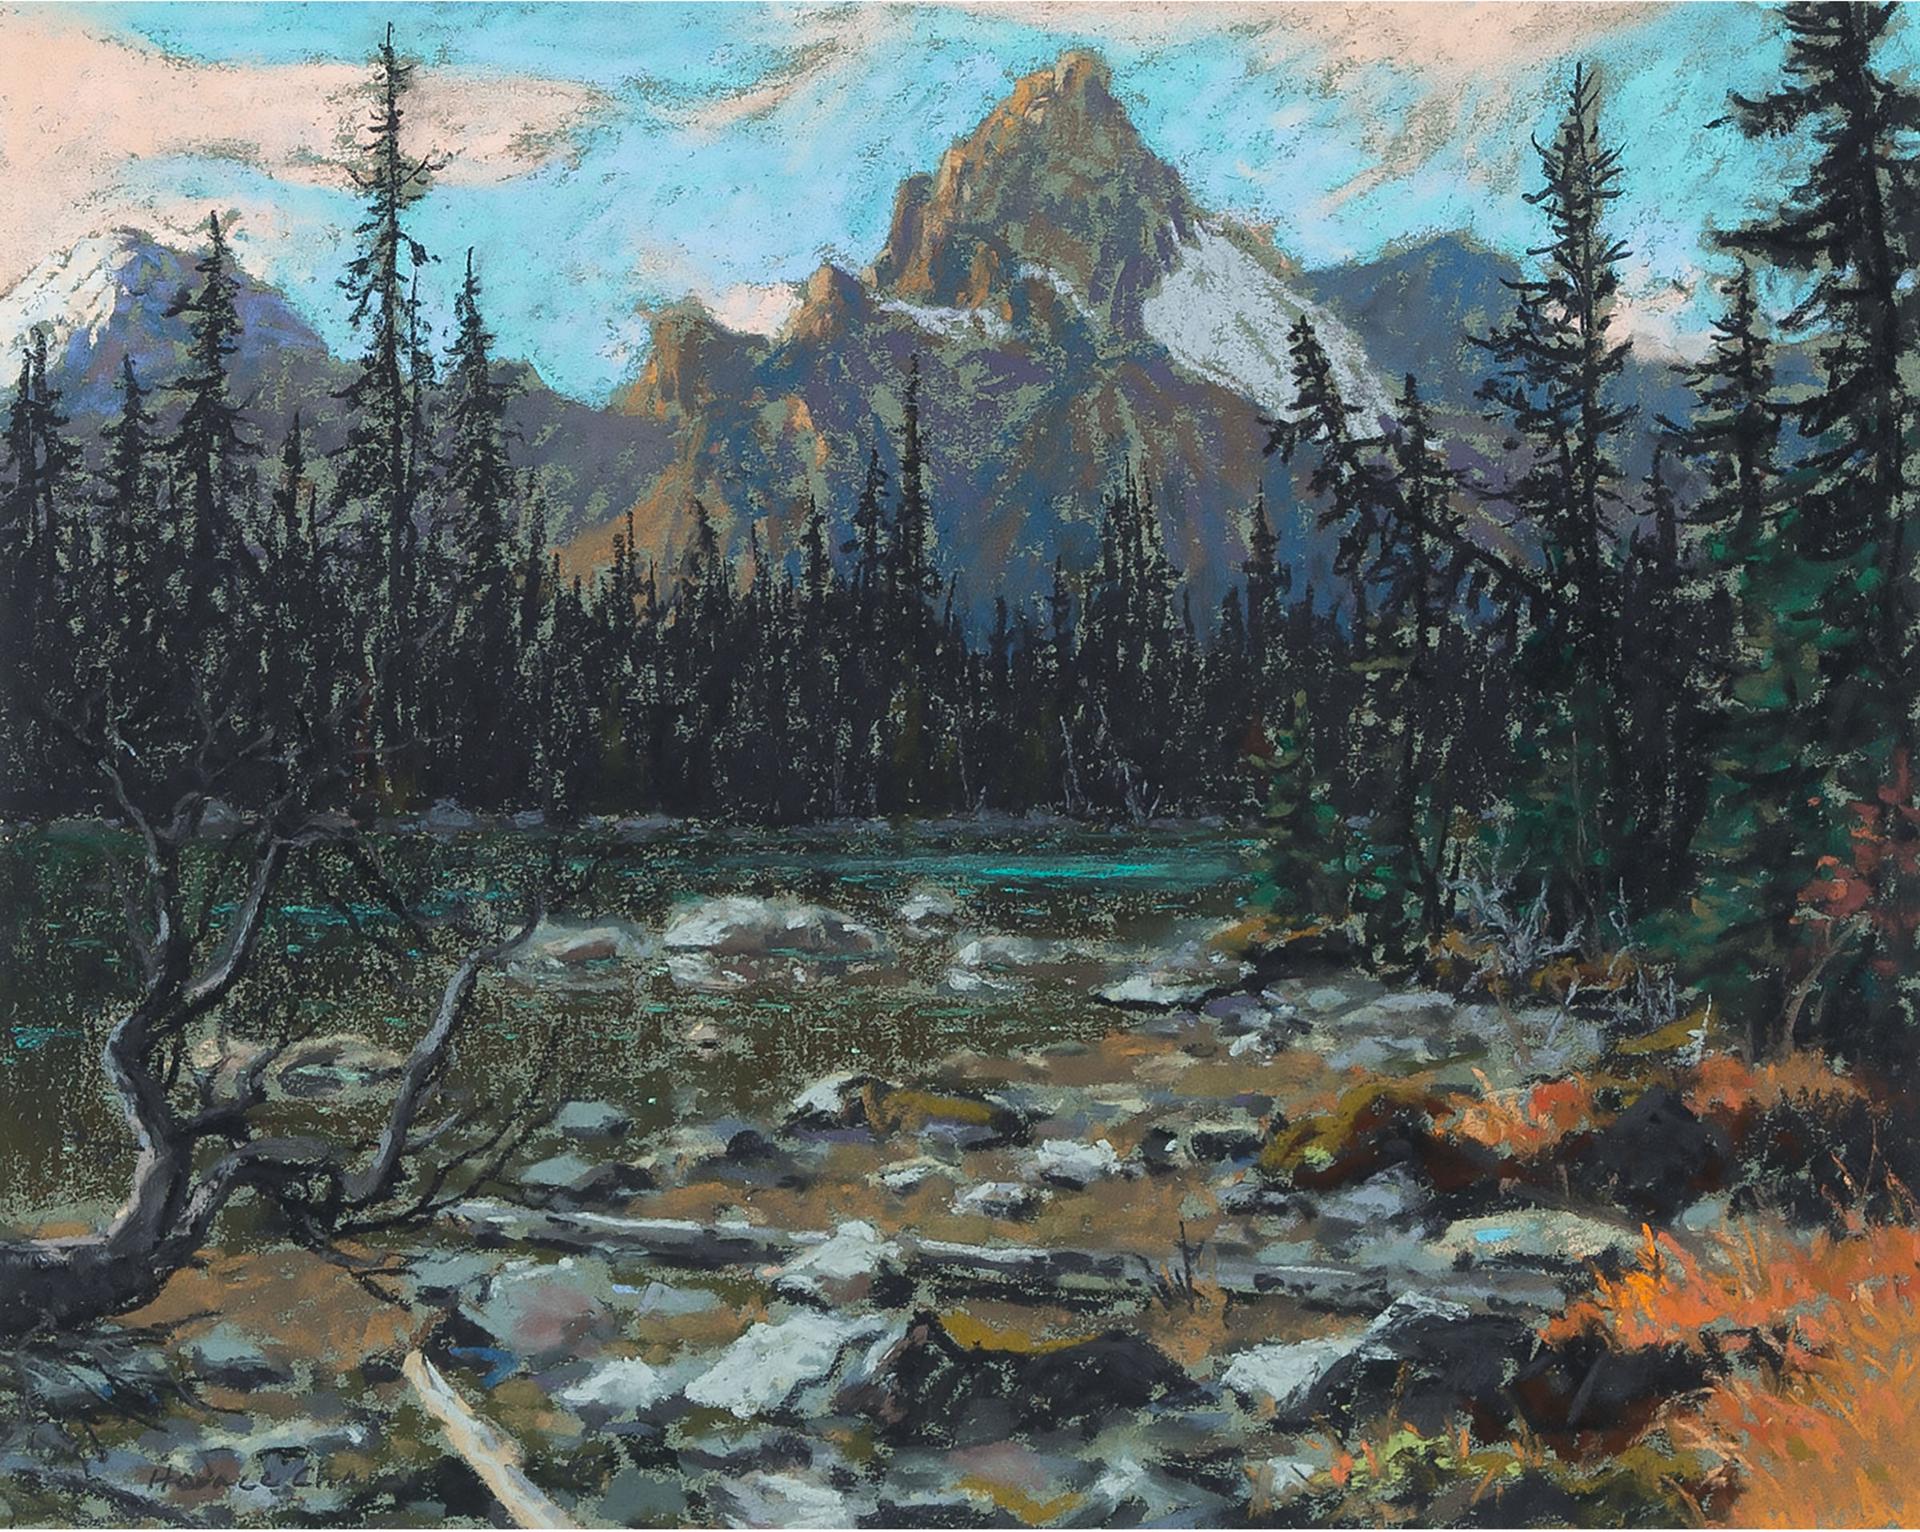 Horace Champagne (1937) - Sunset On Cathedral Mountain, 1993 (From Lake O'hara, Yoho National Park, B.C.)